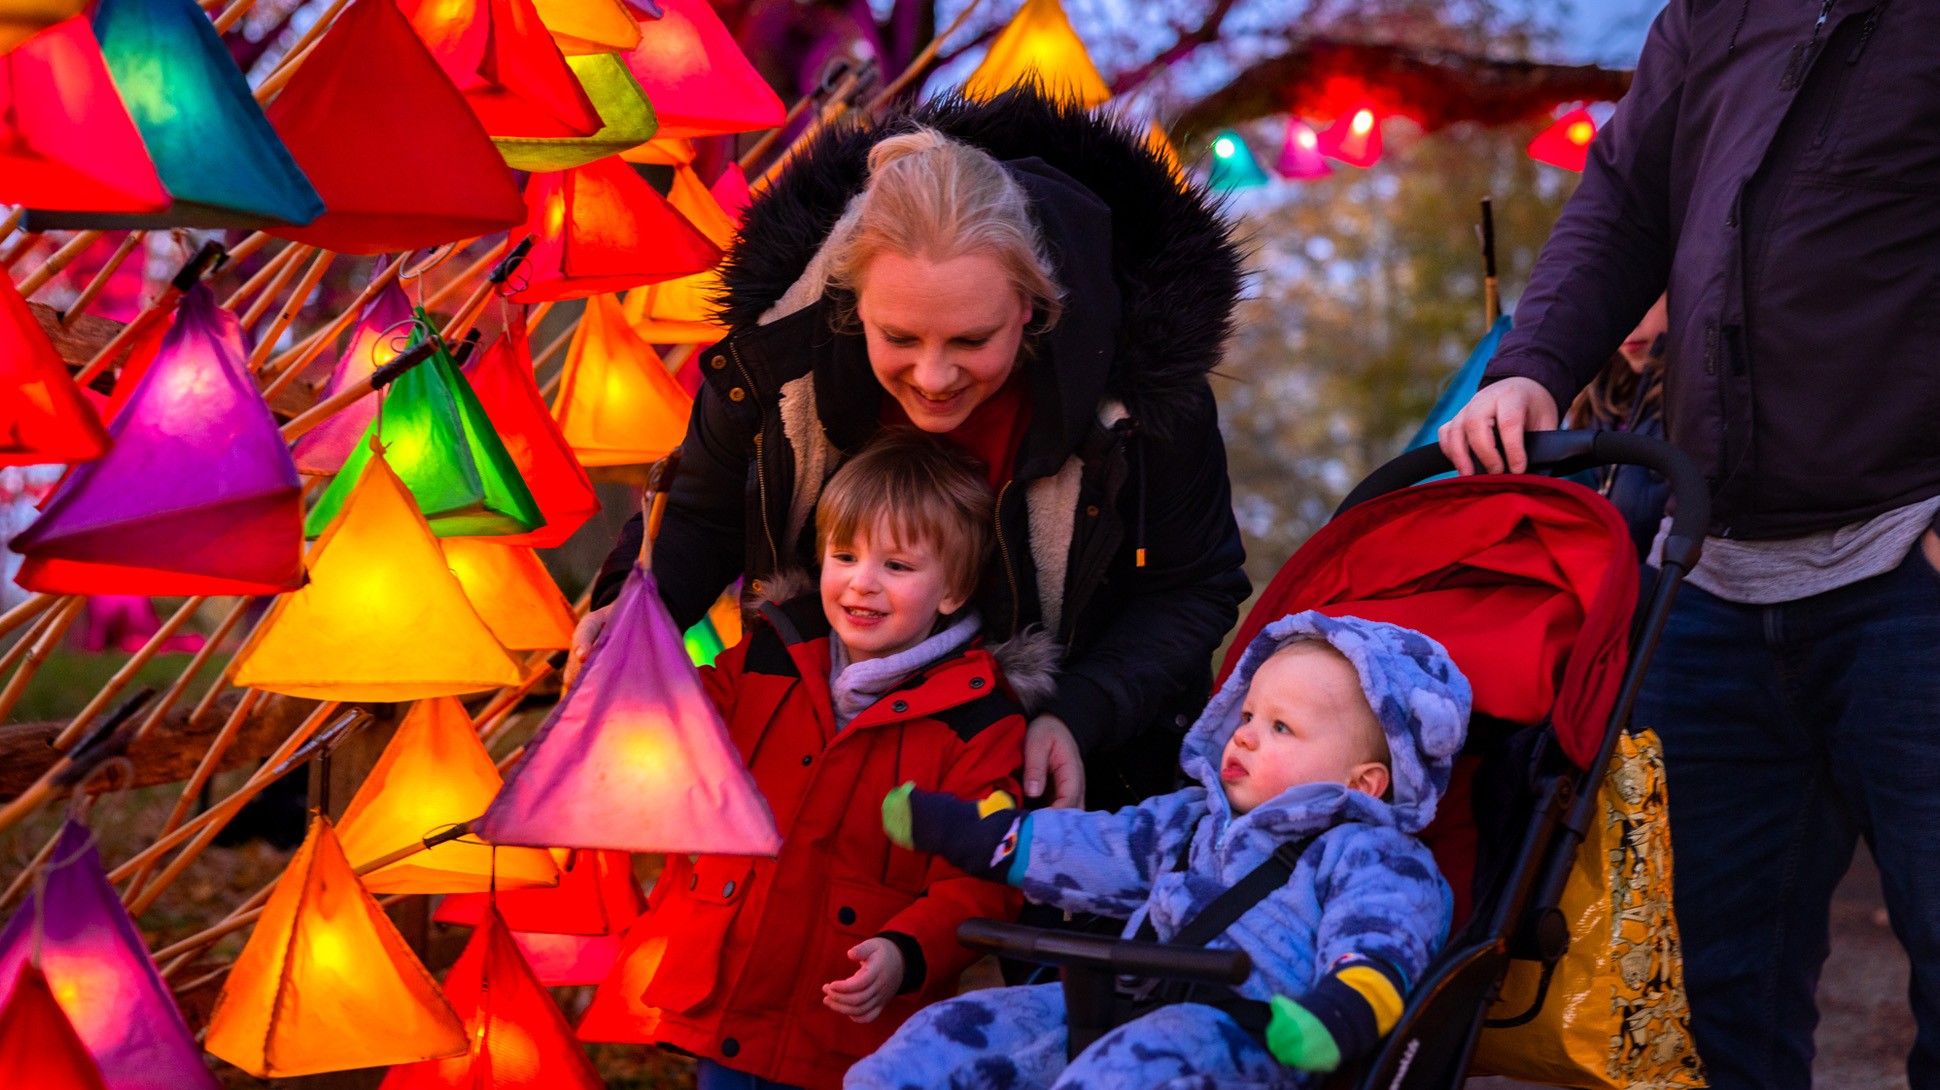 A mother and two young children in front of a row of colourful glowing lanterns.